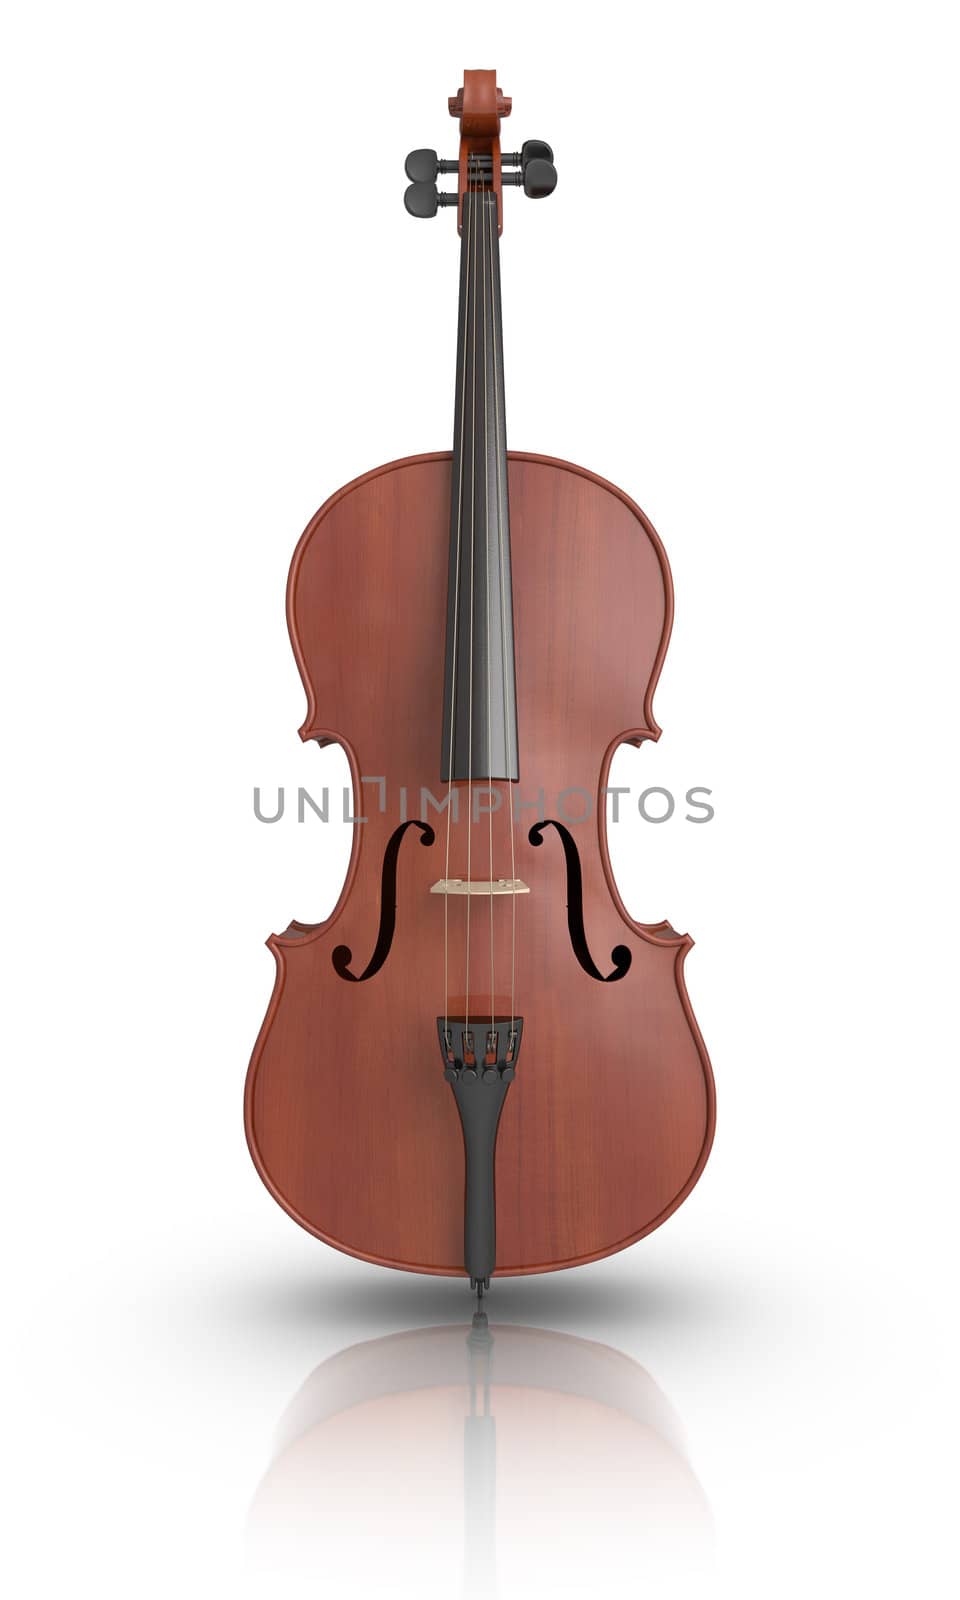 3D rendered Cello on reflective ground.